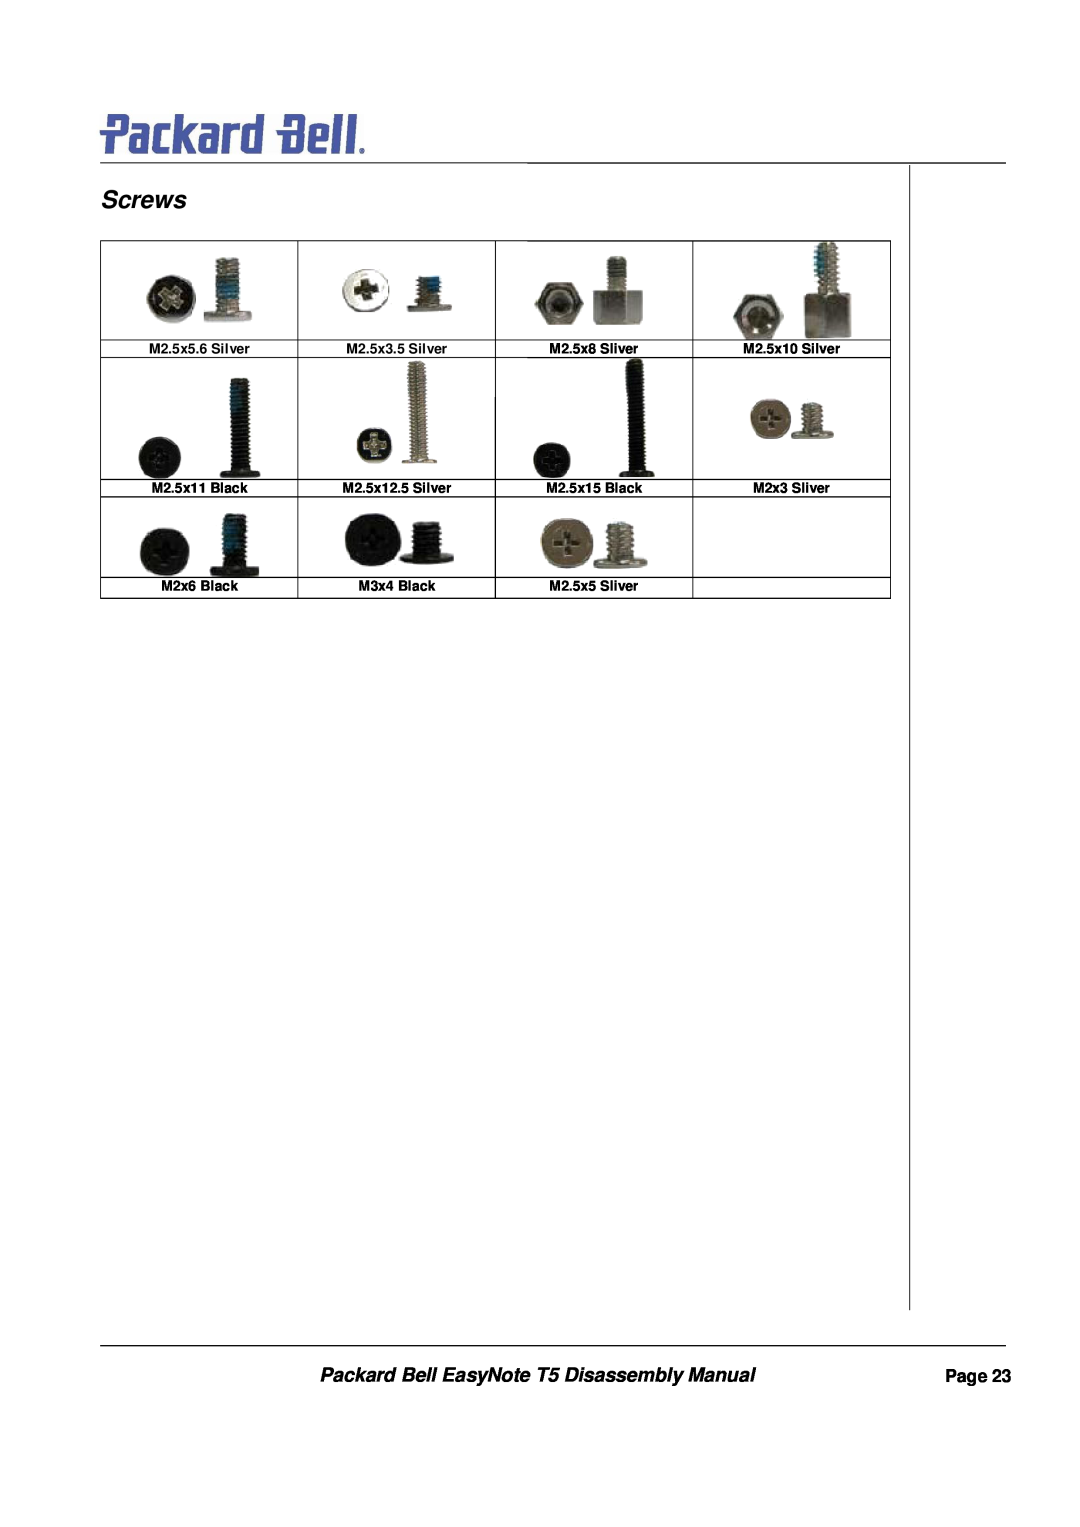 Packard Bell Screws, Packard Bell EasyNote T5 Disassembly Manual, Page, M2.5x5.6 Silver, M2.5x3.5 Silver, M2.5x8 Sliver 